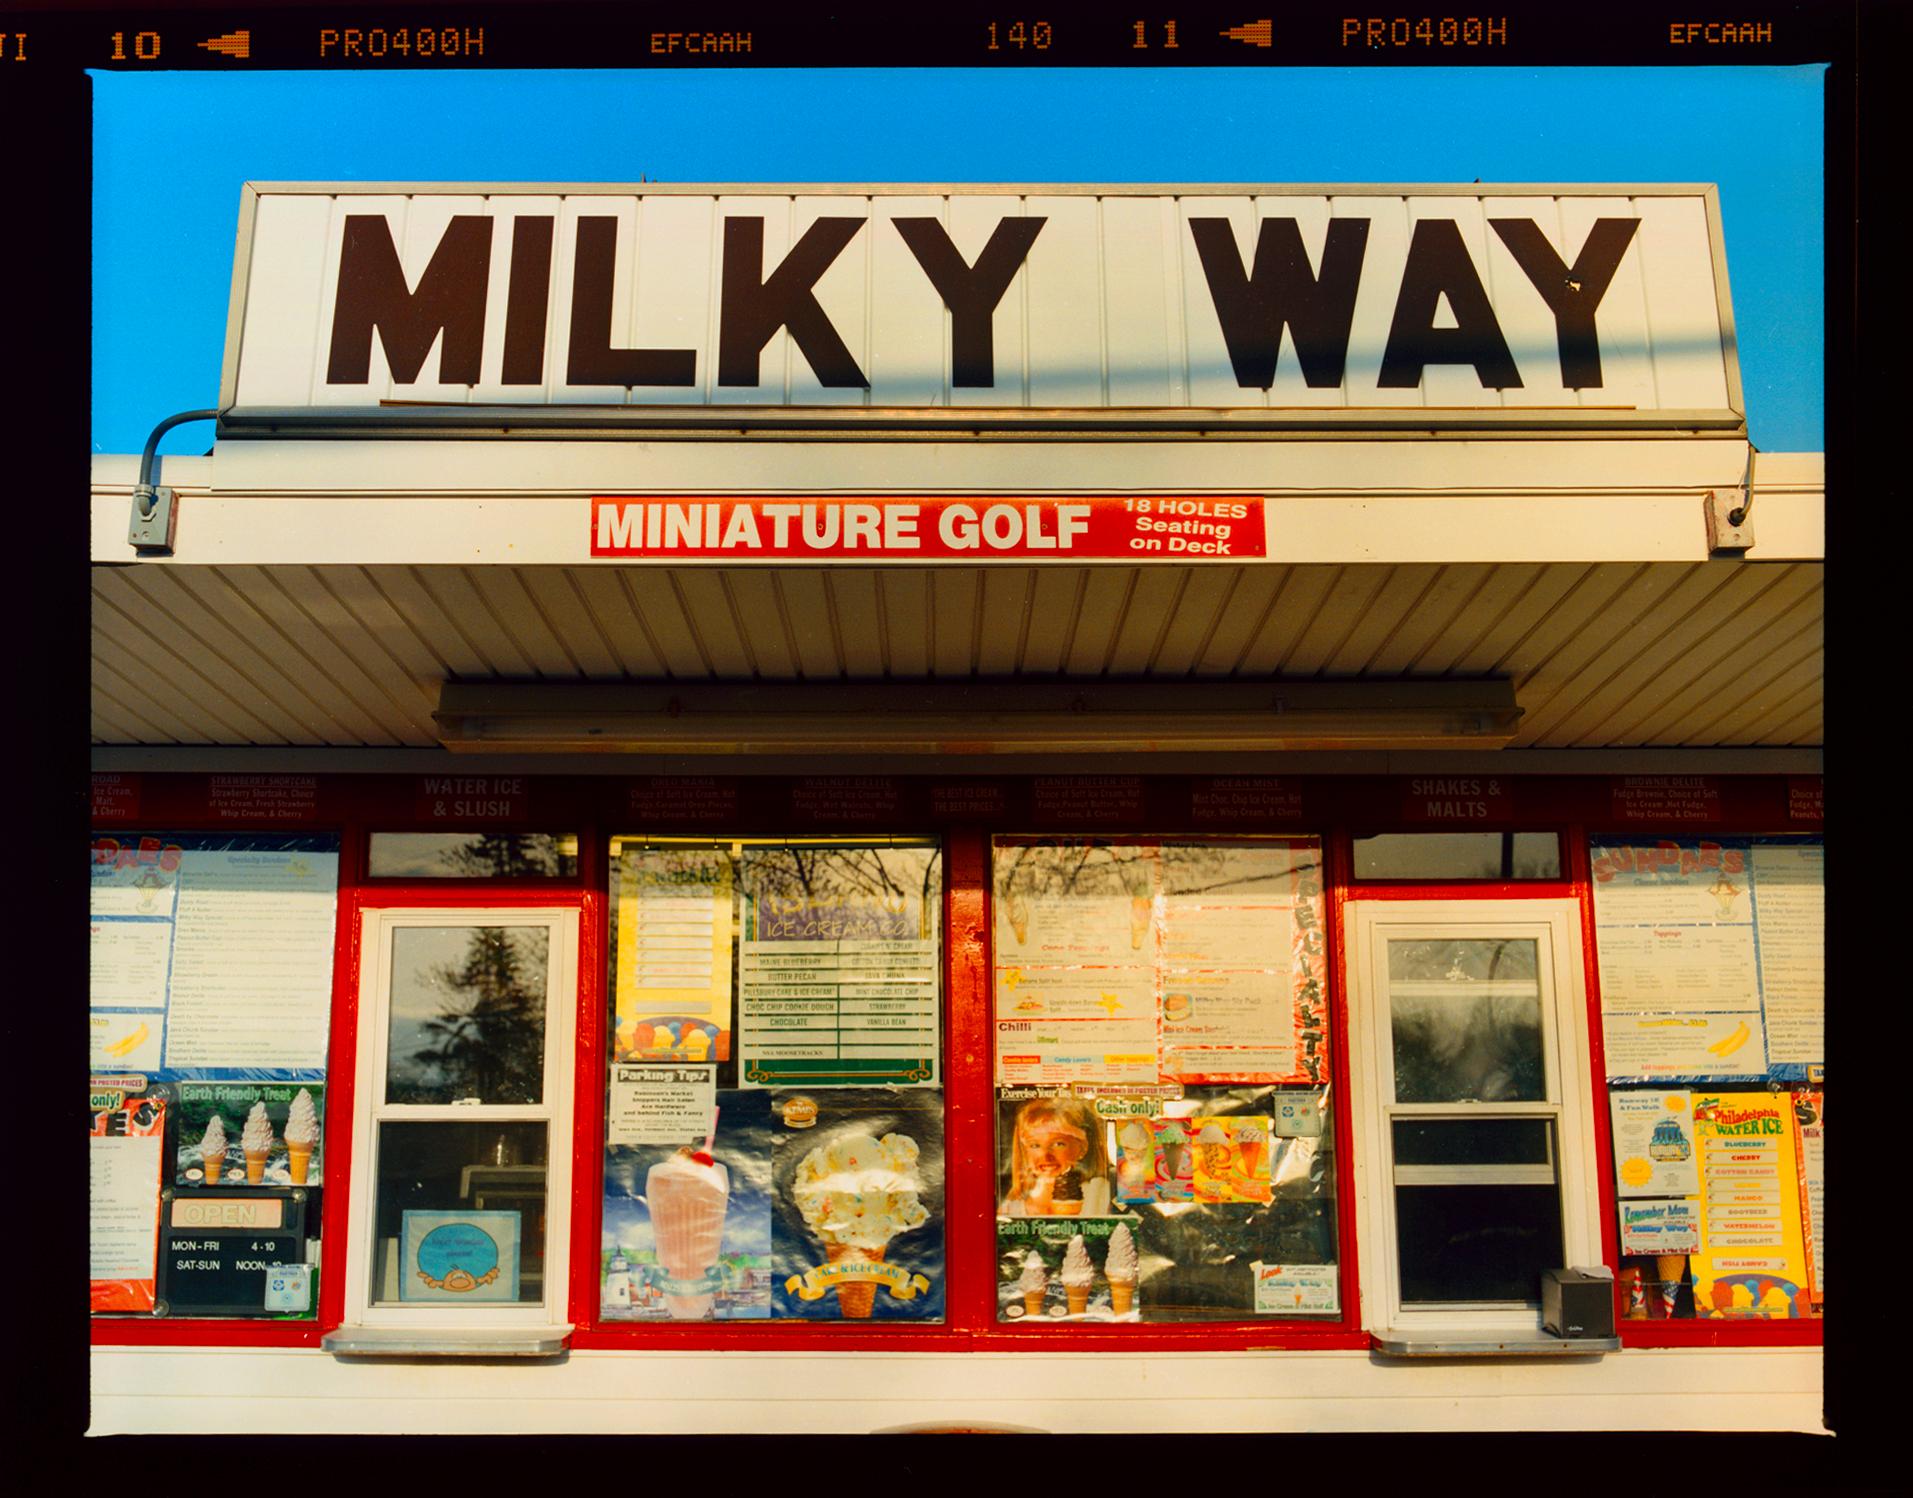 'Milky Way' on the road to Cape May from Richard Heeps Jersey Shore series. Taken in April 2013, this picture was first executed in Richard's darkroom in October 2020, he presents it full frame showing the film rebate. 
This roadside America